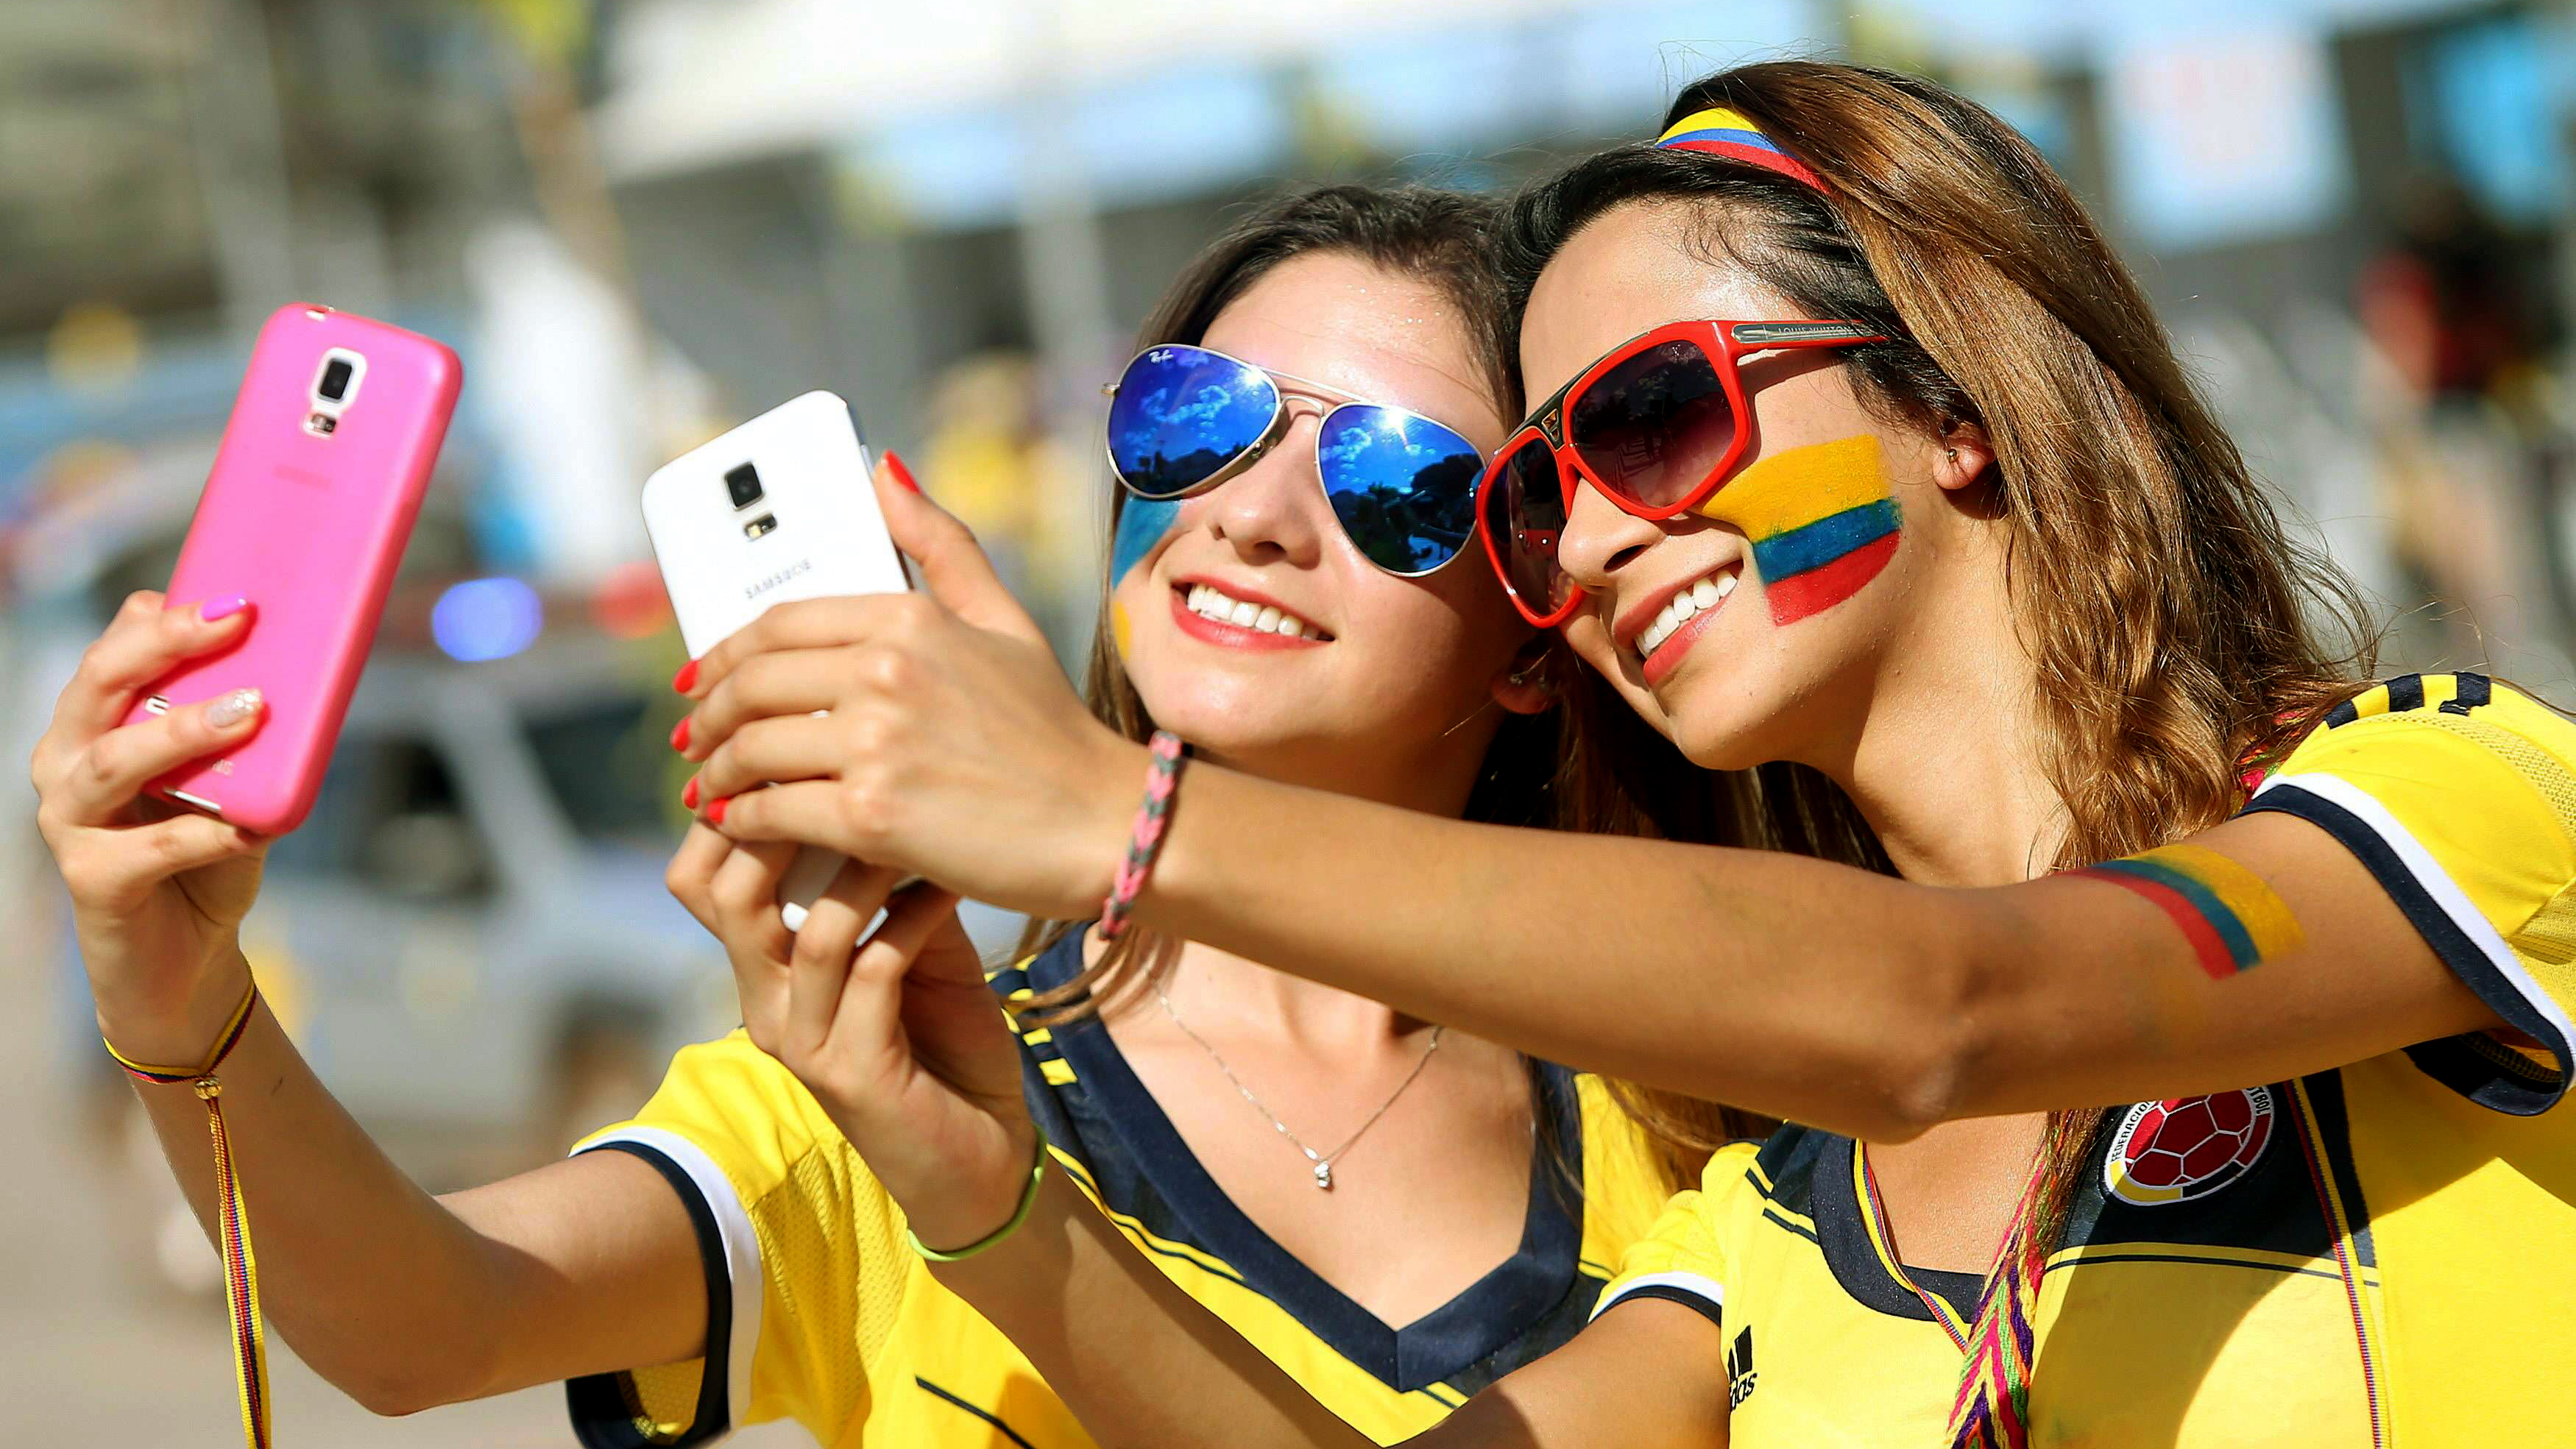 FiFA World Cup Women Selfies Sunglasses Smiling Colombia Brunette Sports Jerseys Smartphone Soccer G 3500x1969